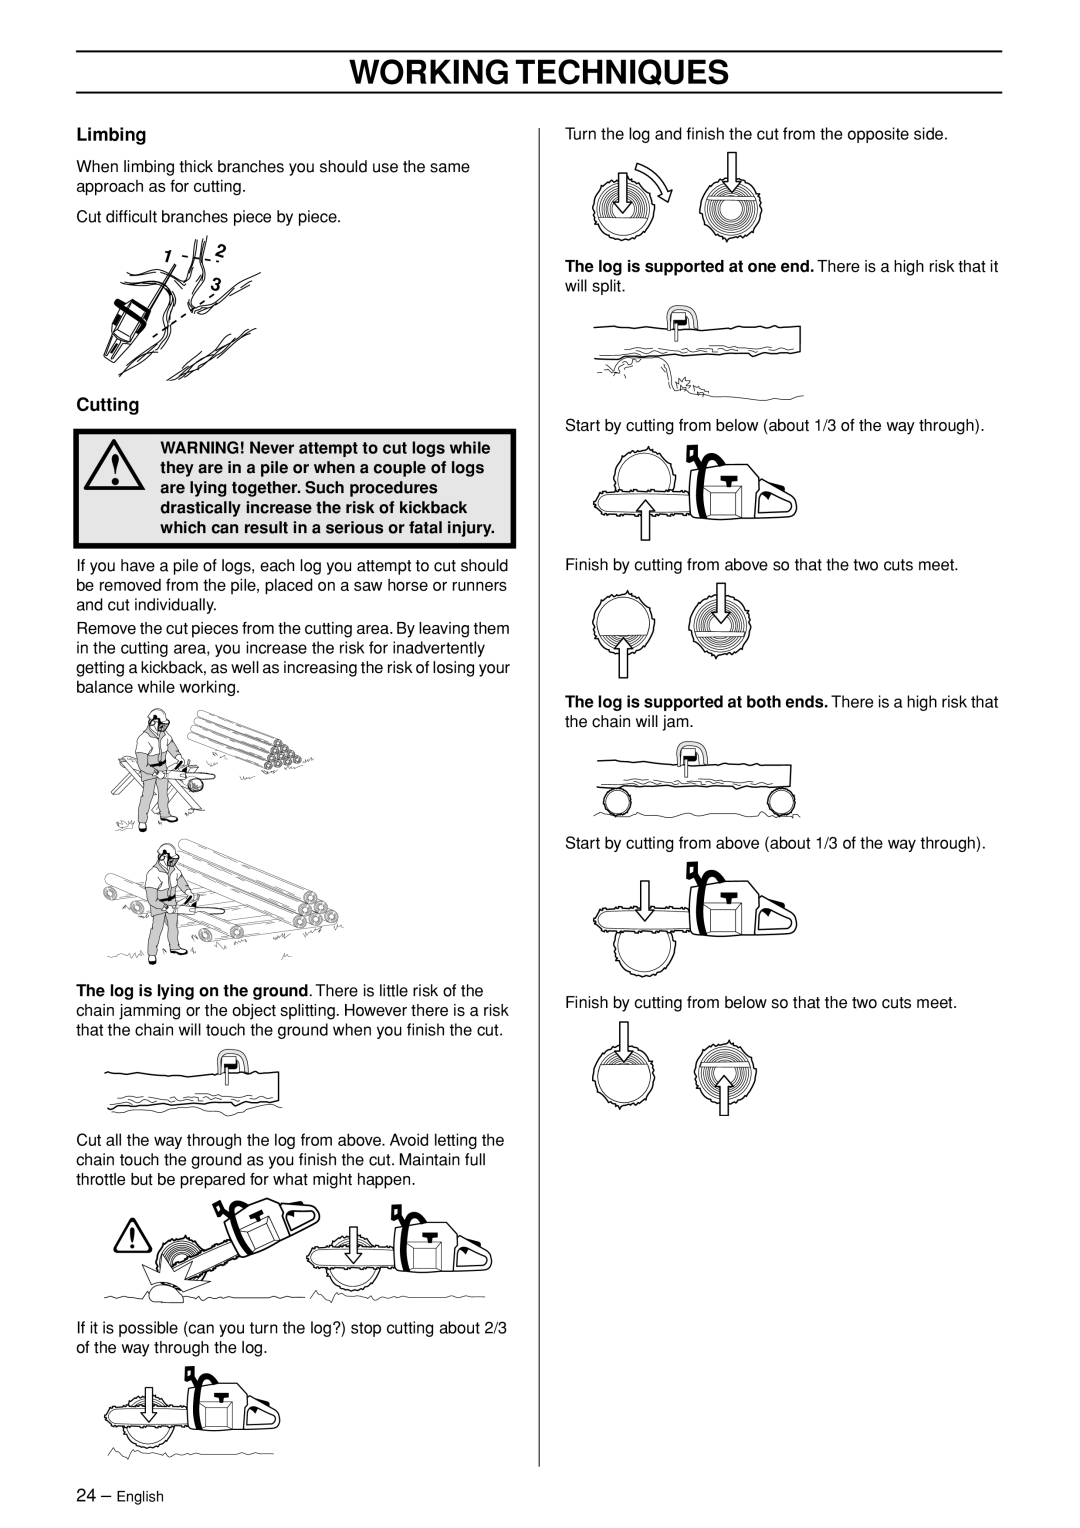 Husqvarna 455 RANCHER manual Limbing, Cutting, WARNING! Never attempt to cut logs while, Working Techniques 